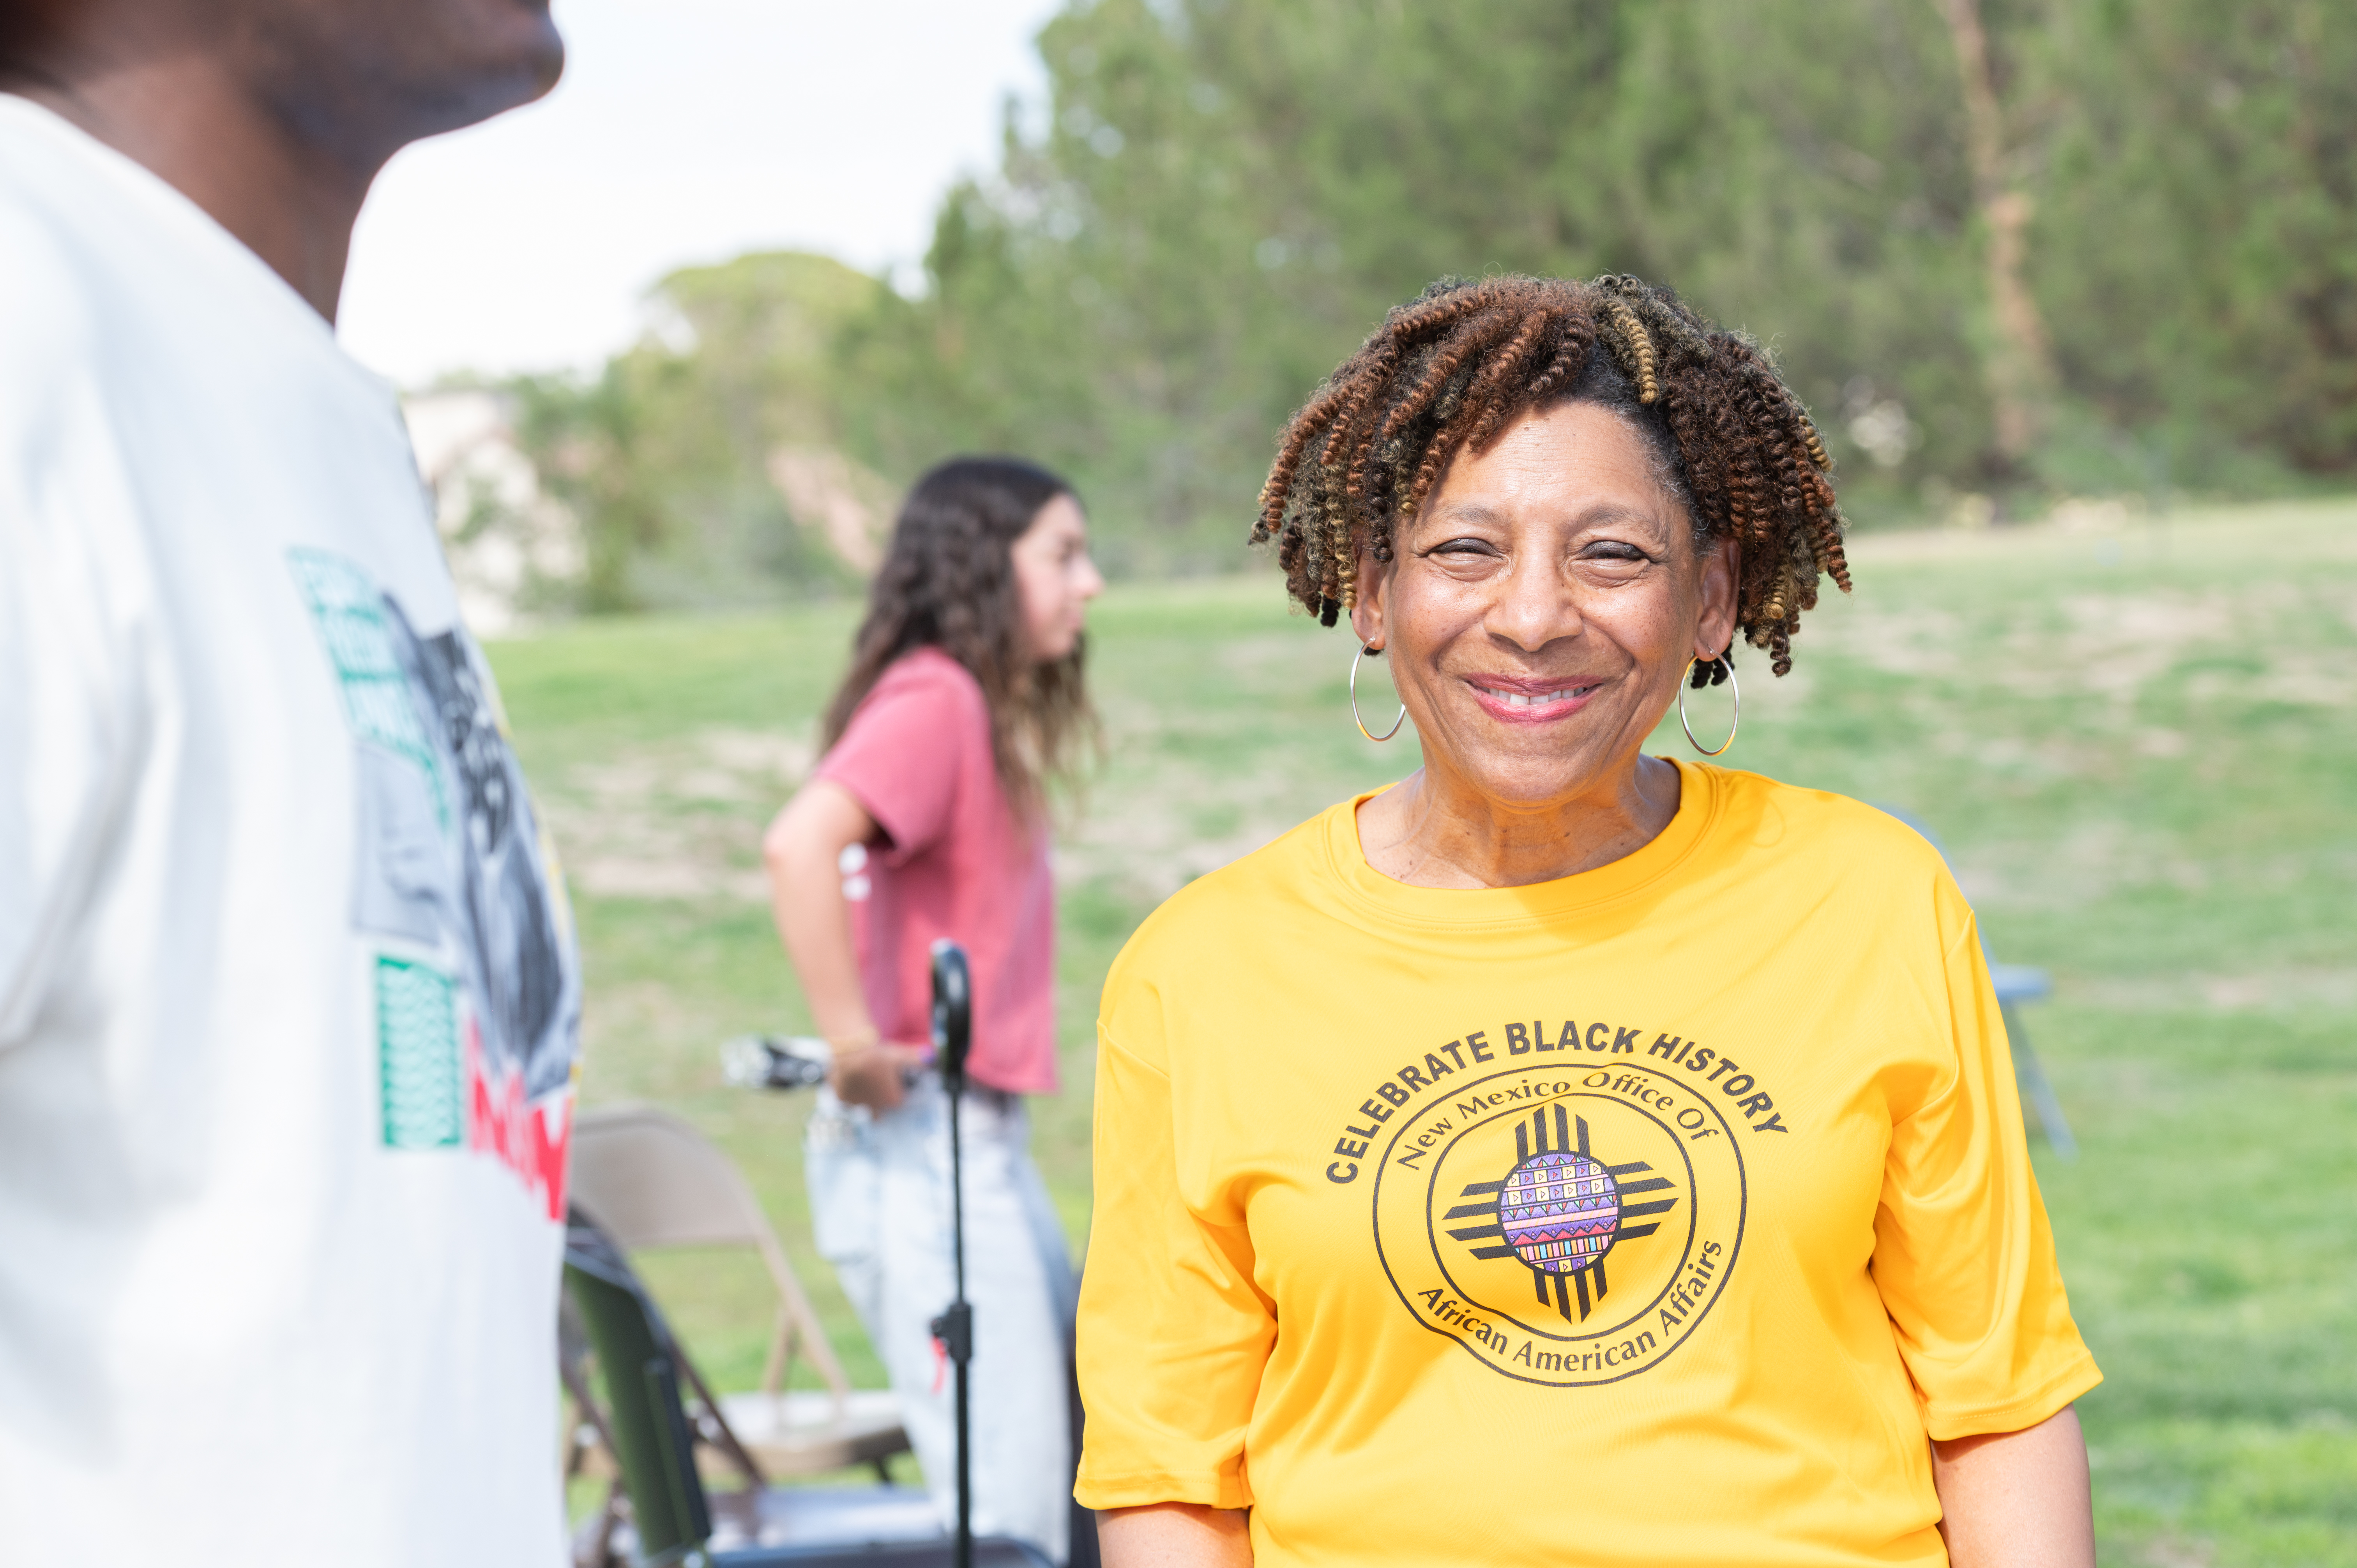 Picture from the celebration of Juneteenth, The image shows an outdoor setting with three individuals present. The primary focus is on a woman in the foreground who is smiling at the camera. She is wearing a bright yellow T-shirt with text and a circular logo on the front. Her hair is styled in short, curly twists, and she is wearing hoop earrings. Behind her to the right, there is another person with long hair, standing sideways and wearing a red T-shirt and light blue jeans. To the left, partially in the frame, is a person with dark skin wearing a white T-shirt. The background features a grassy field and trees.